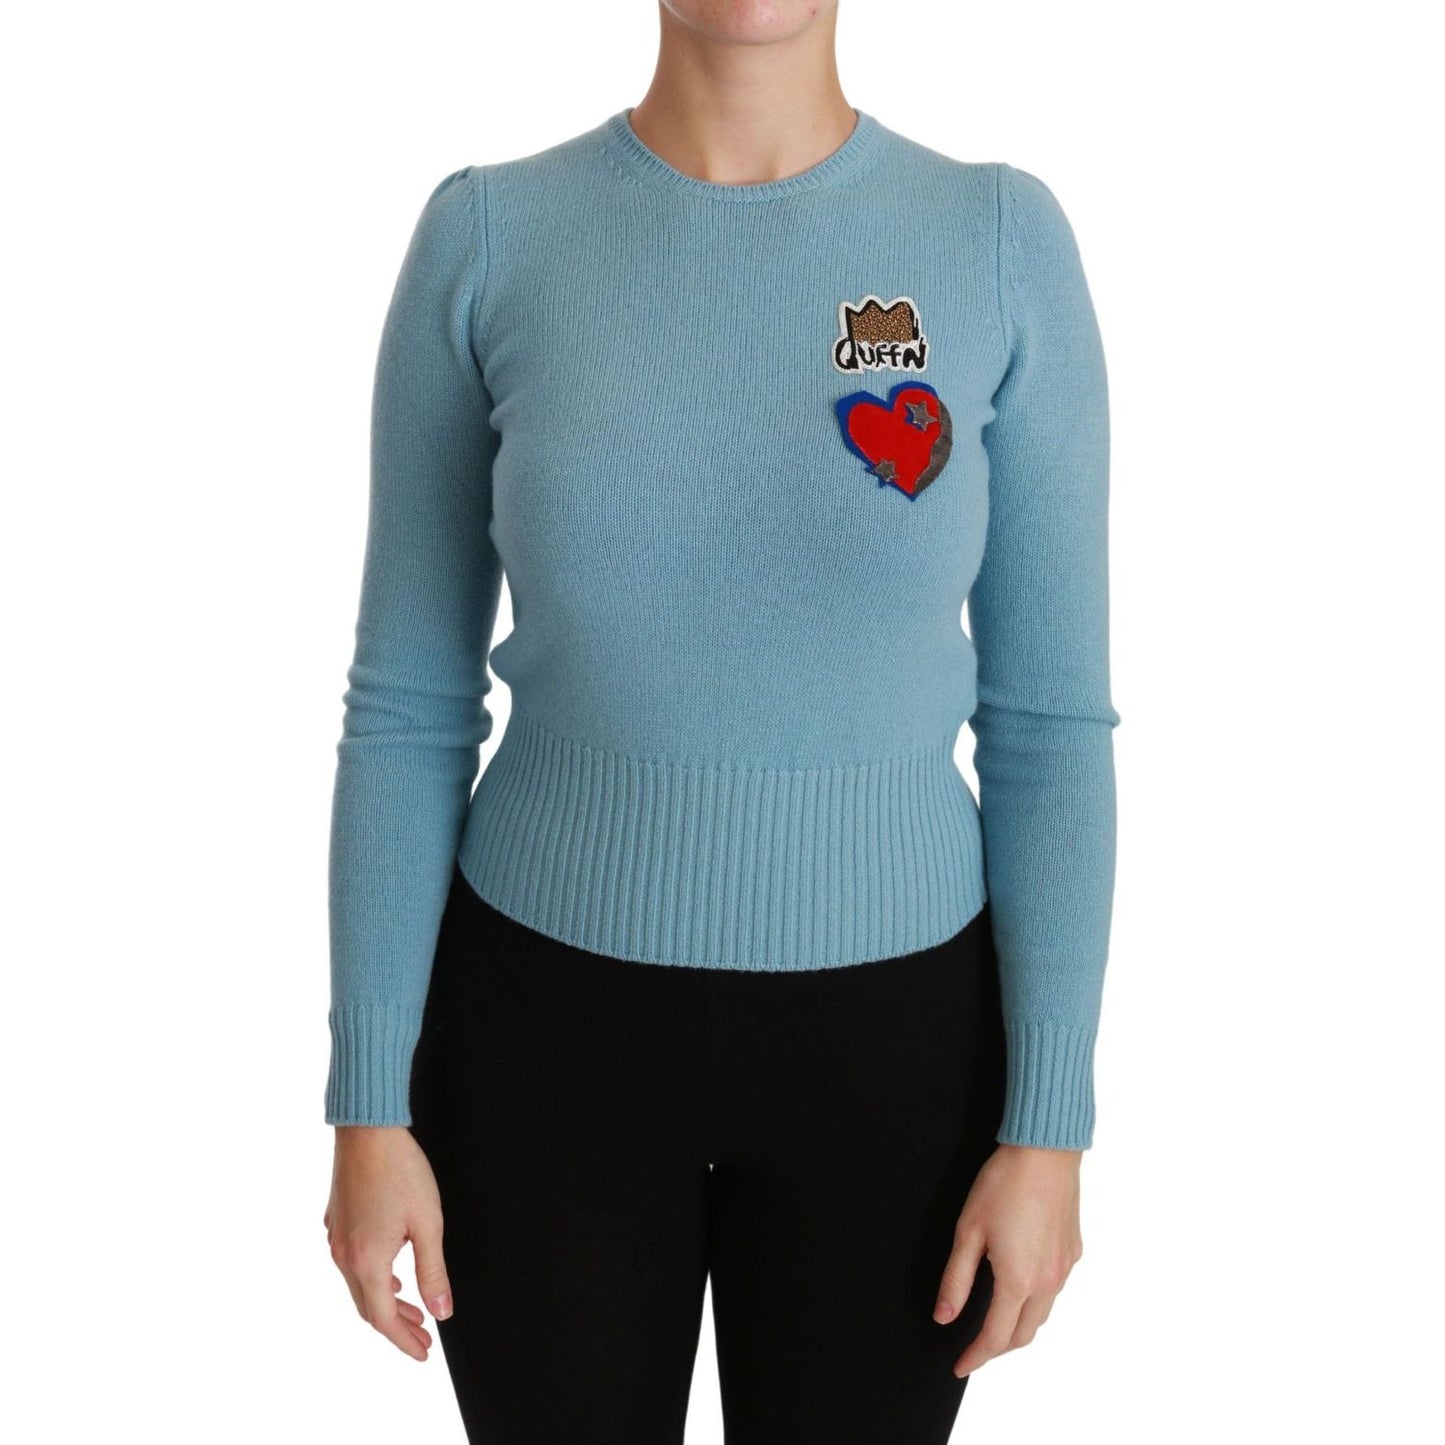 Dolce & Gabbana Queen Heart Beaded Wool Sweater WOMAN TOPS AND SHIRTS blue-wool-queen-heart-pullover-sweater IMG_7176-scaled-51e4f99e-9b3.jpg